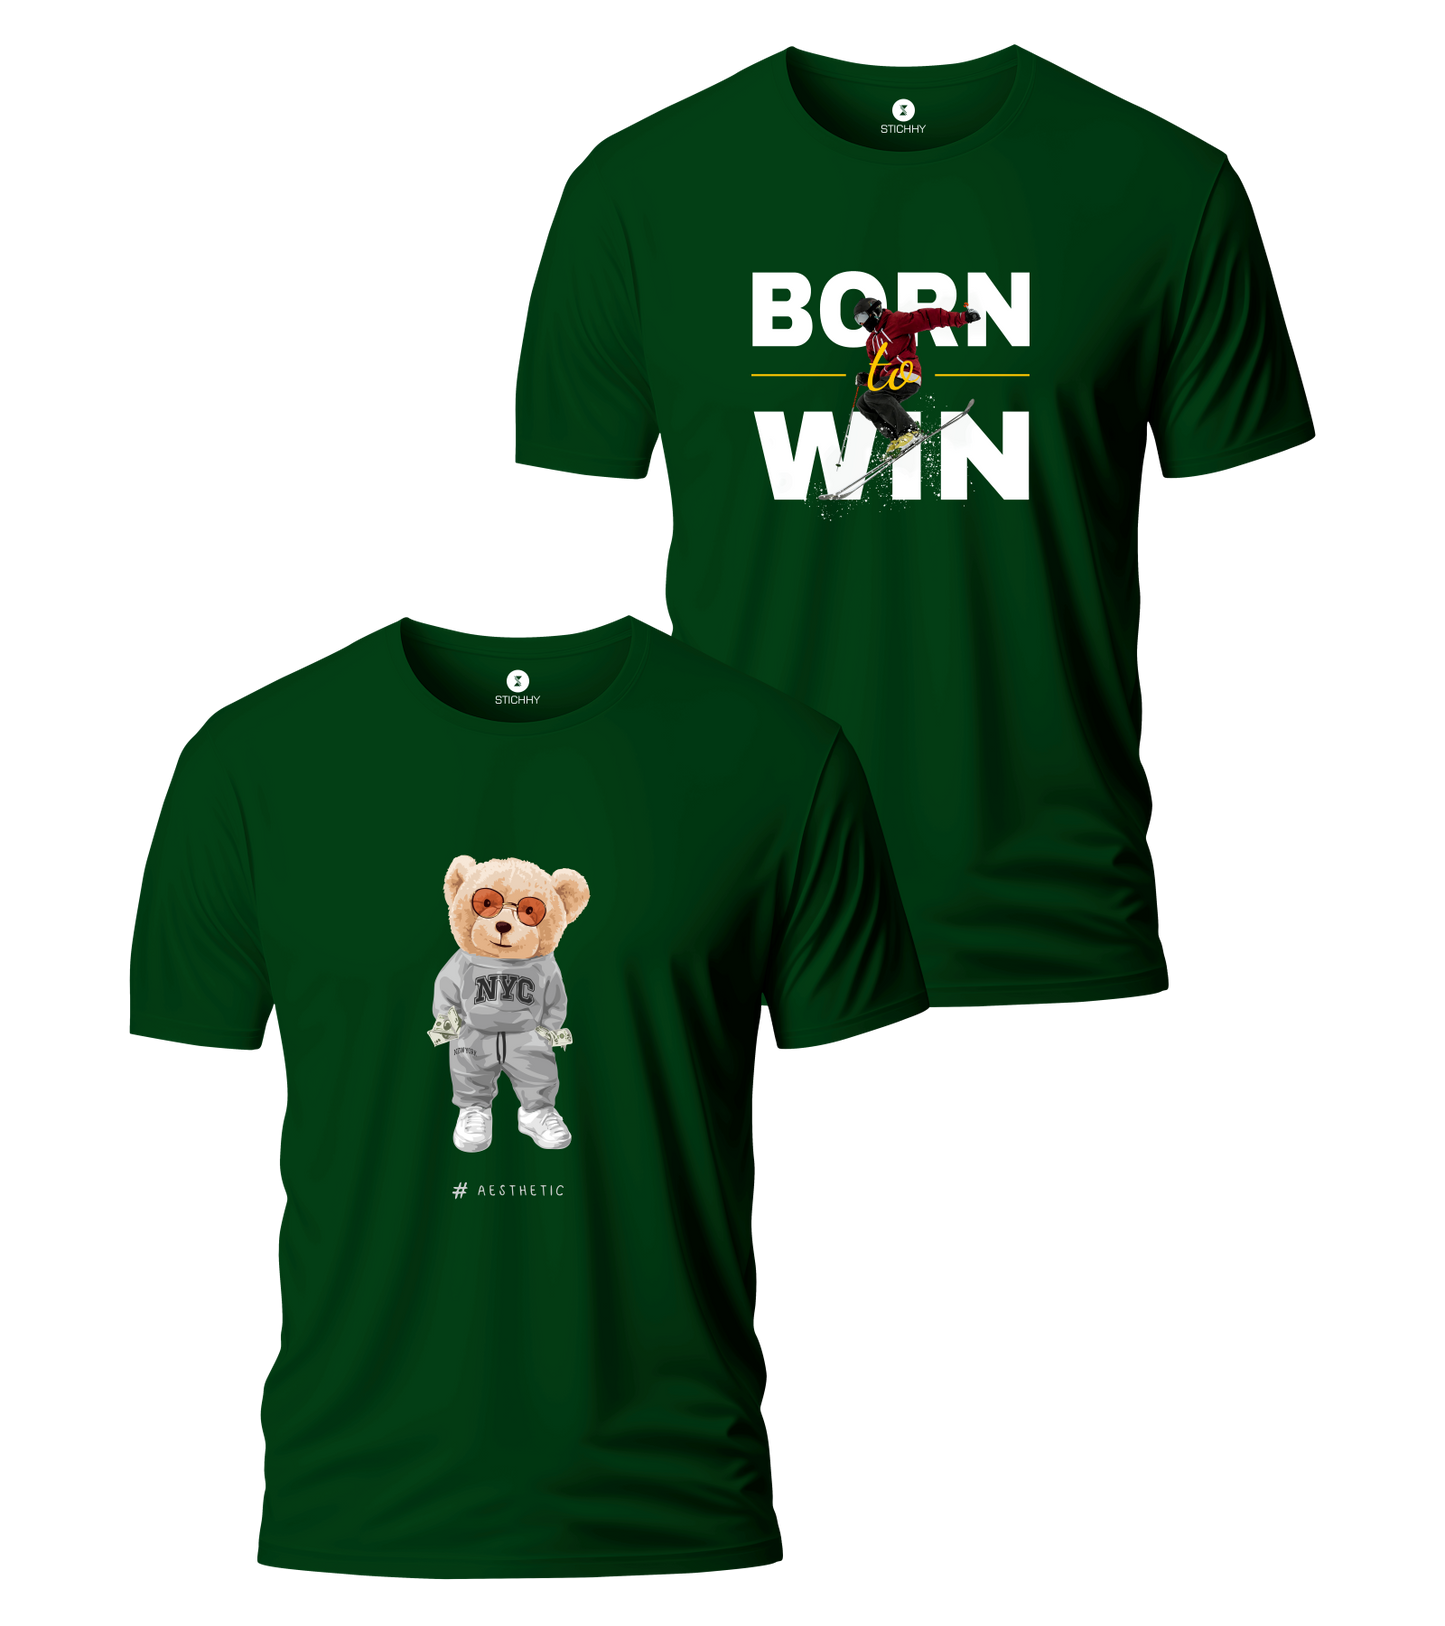 AESTHETIC & BORN TO WIN T-SHIRT BUY 1 GET 1 FREE